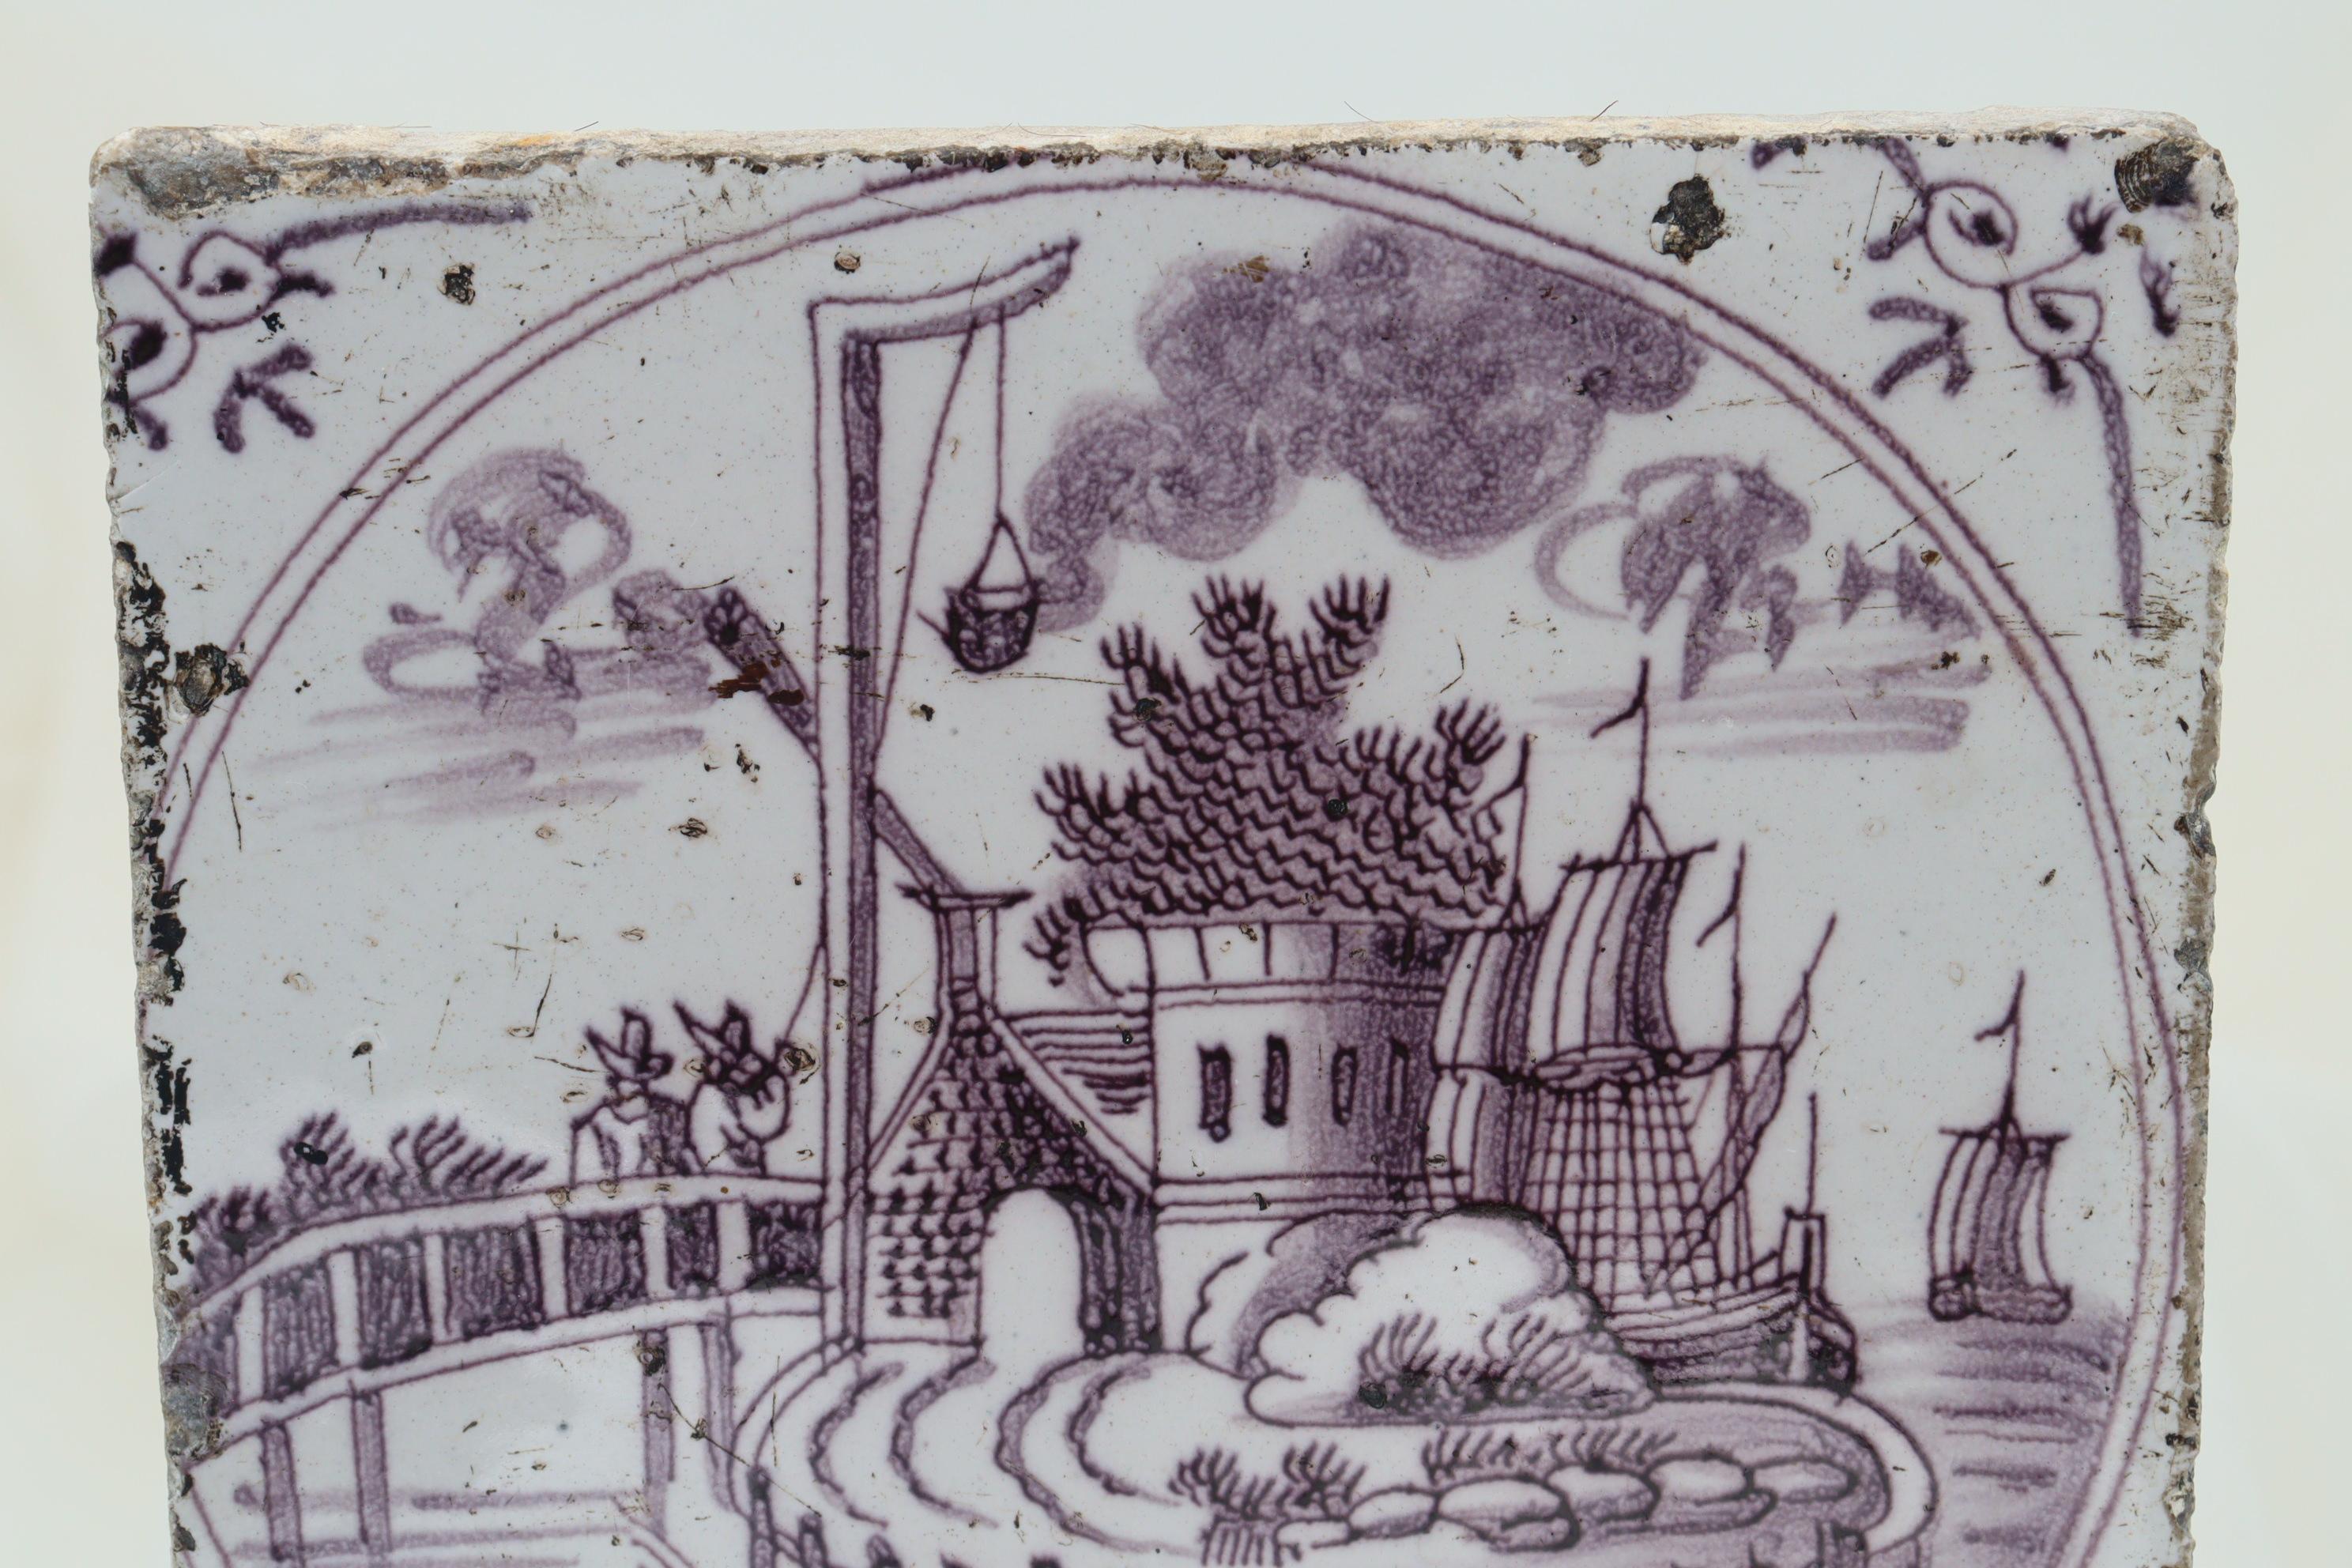 Enclosed in a circle and painted in purple or puce, the central decoration of this Dutch hand painted delft tile features a ship moored next to a fortified building where two men are using a pulley to unload some cargo. Possibly from Haarlem, the